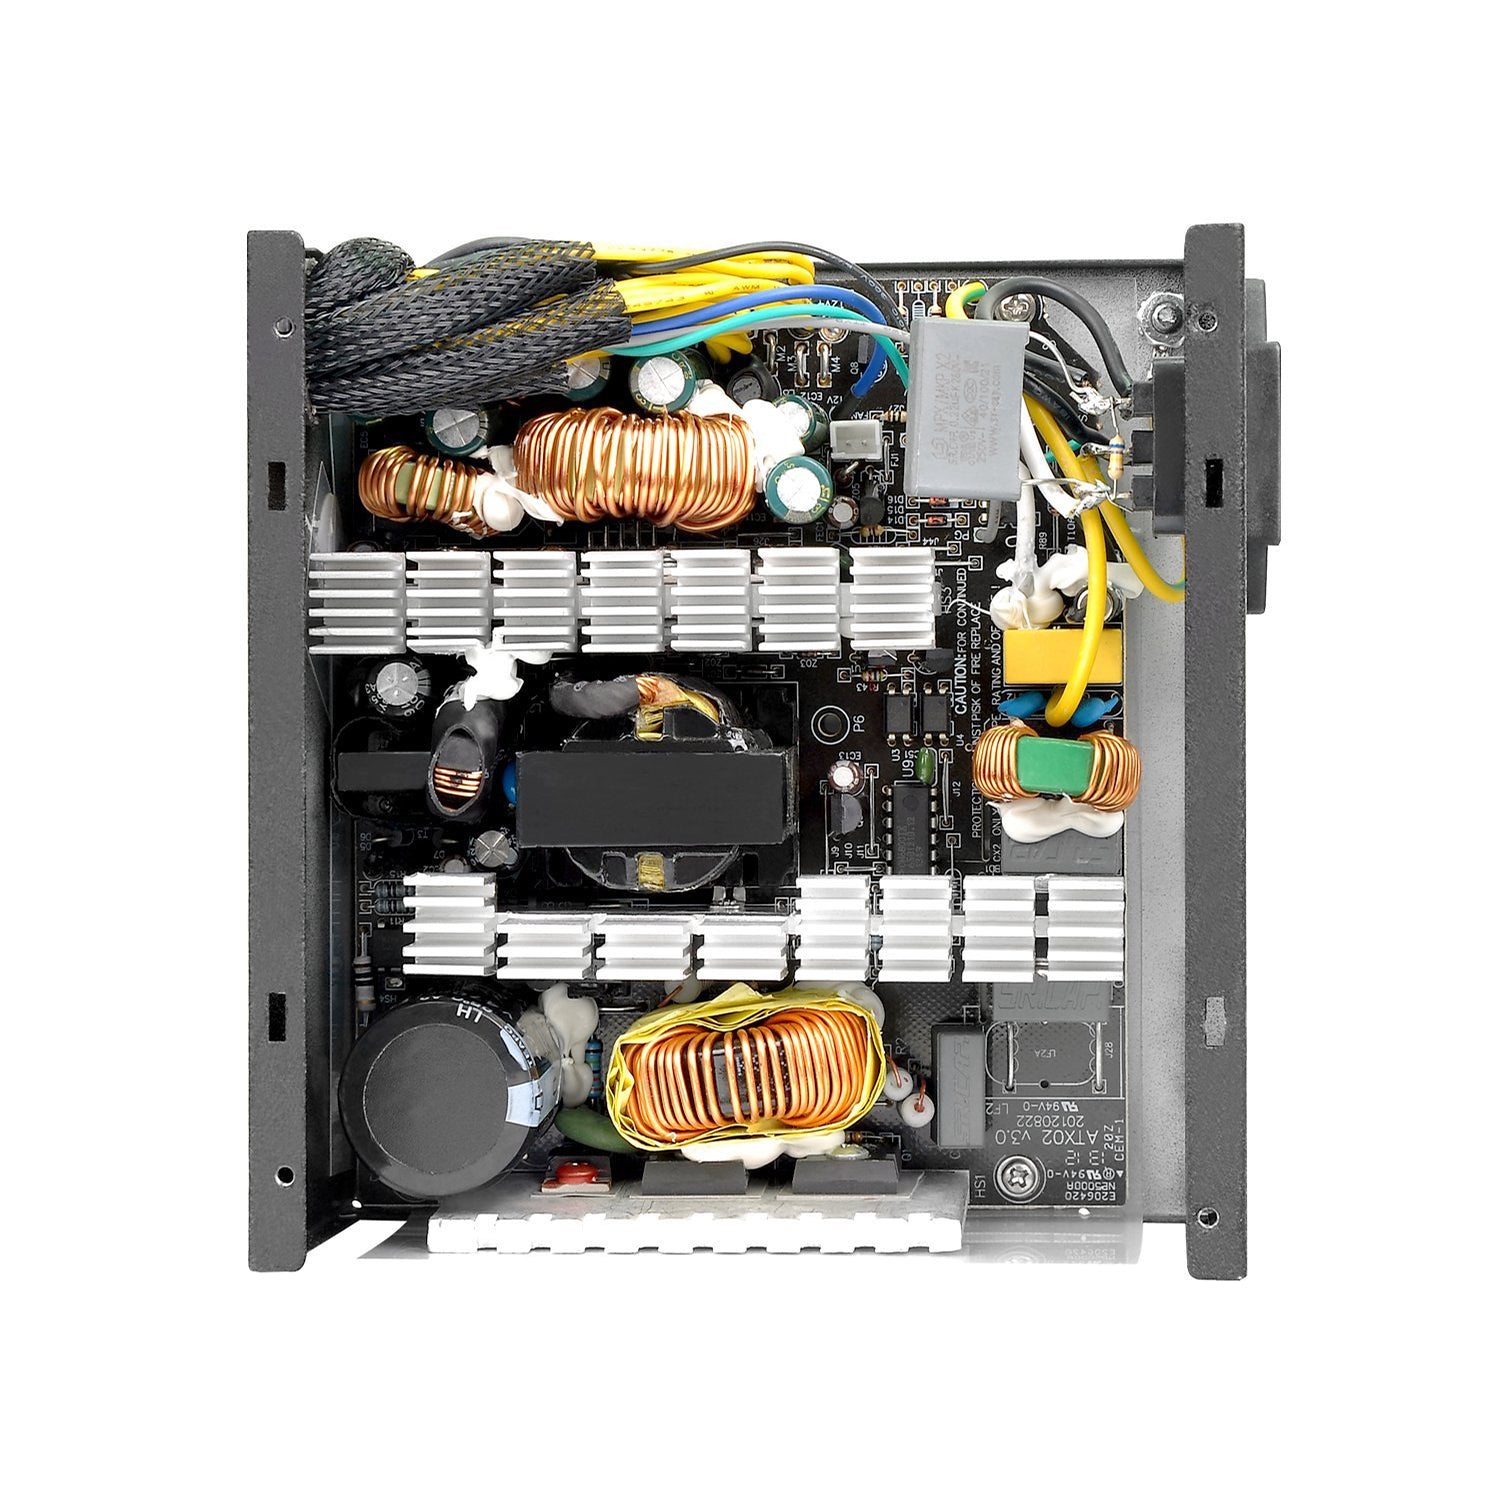 Thermaltake Smart Series 700W Power Supply SLI ATX Form Factor CrossFire Ready Continuous Power ATX12V V2.3 / EPS12V 80 PLUS Certified Active PFC Haswell Ready (PS-SPD-0700NPCWUS-W)